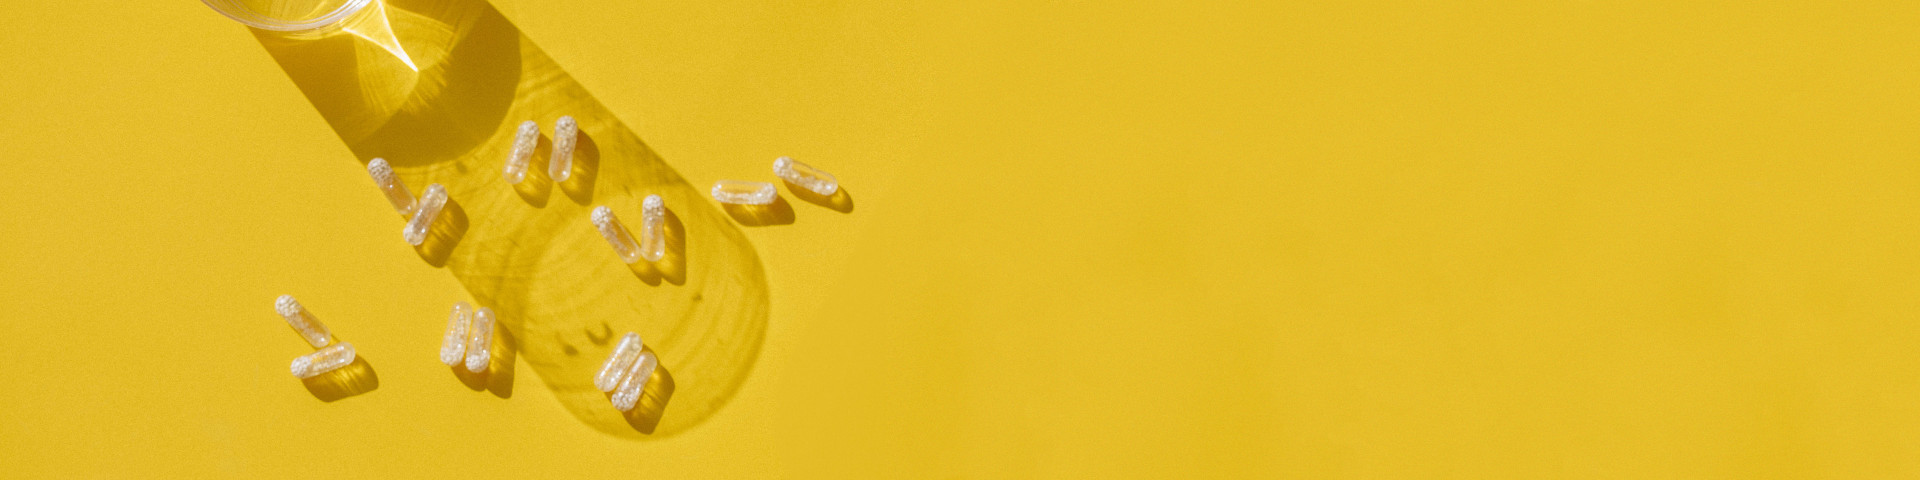 Several prenatal vitamins scattered on a yellow background.